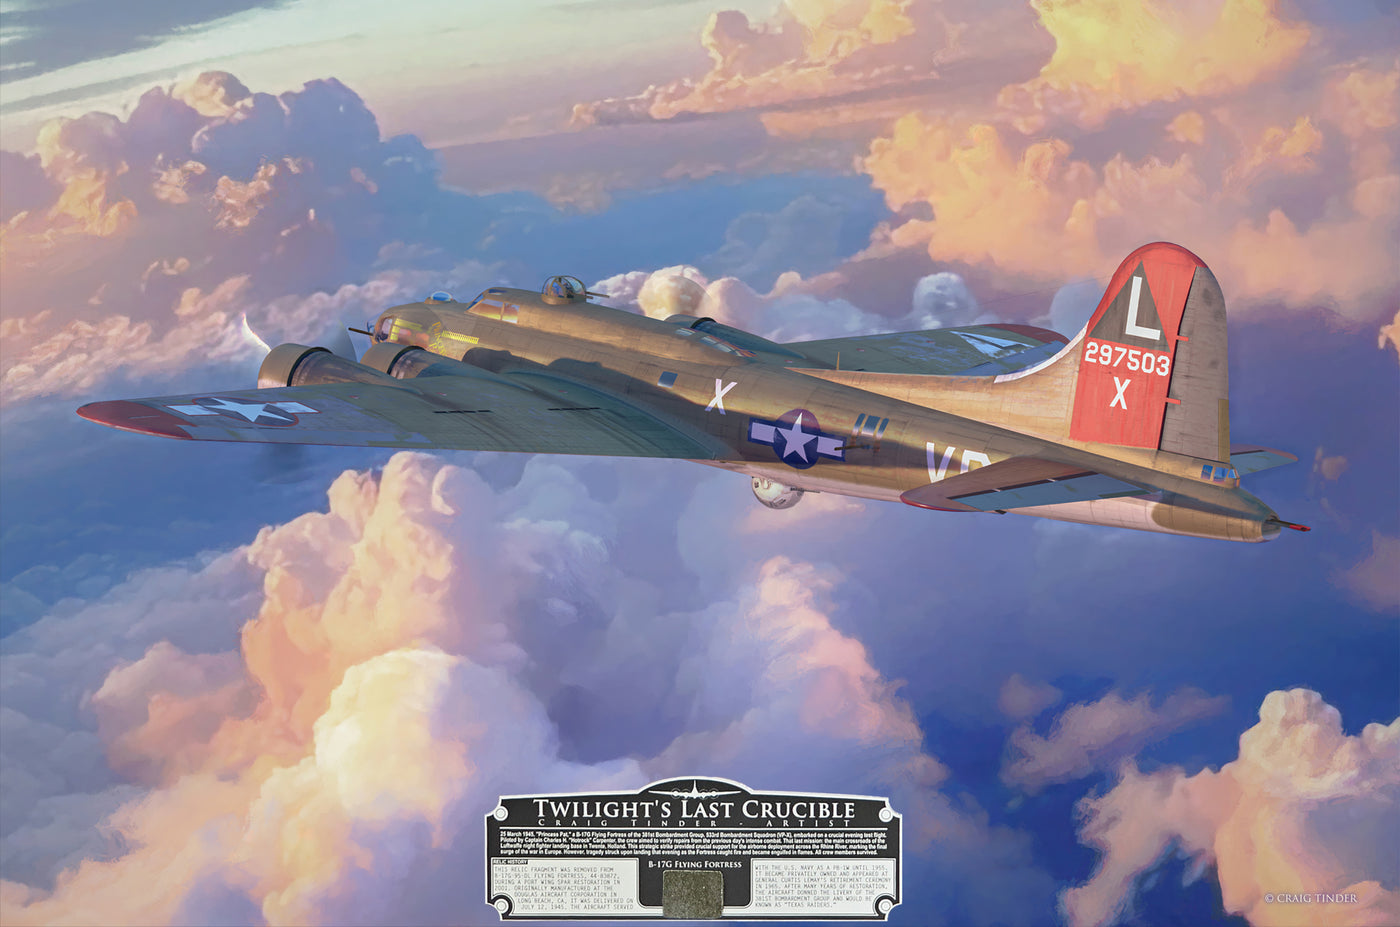 Art print "Twilight's Last Crucible" by Artist Craig Tinder, showing a B-17 flying through the clouds at sunset.